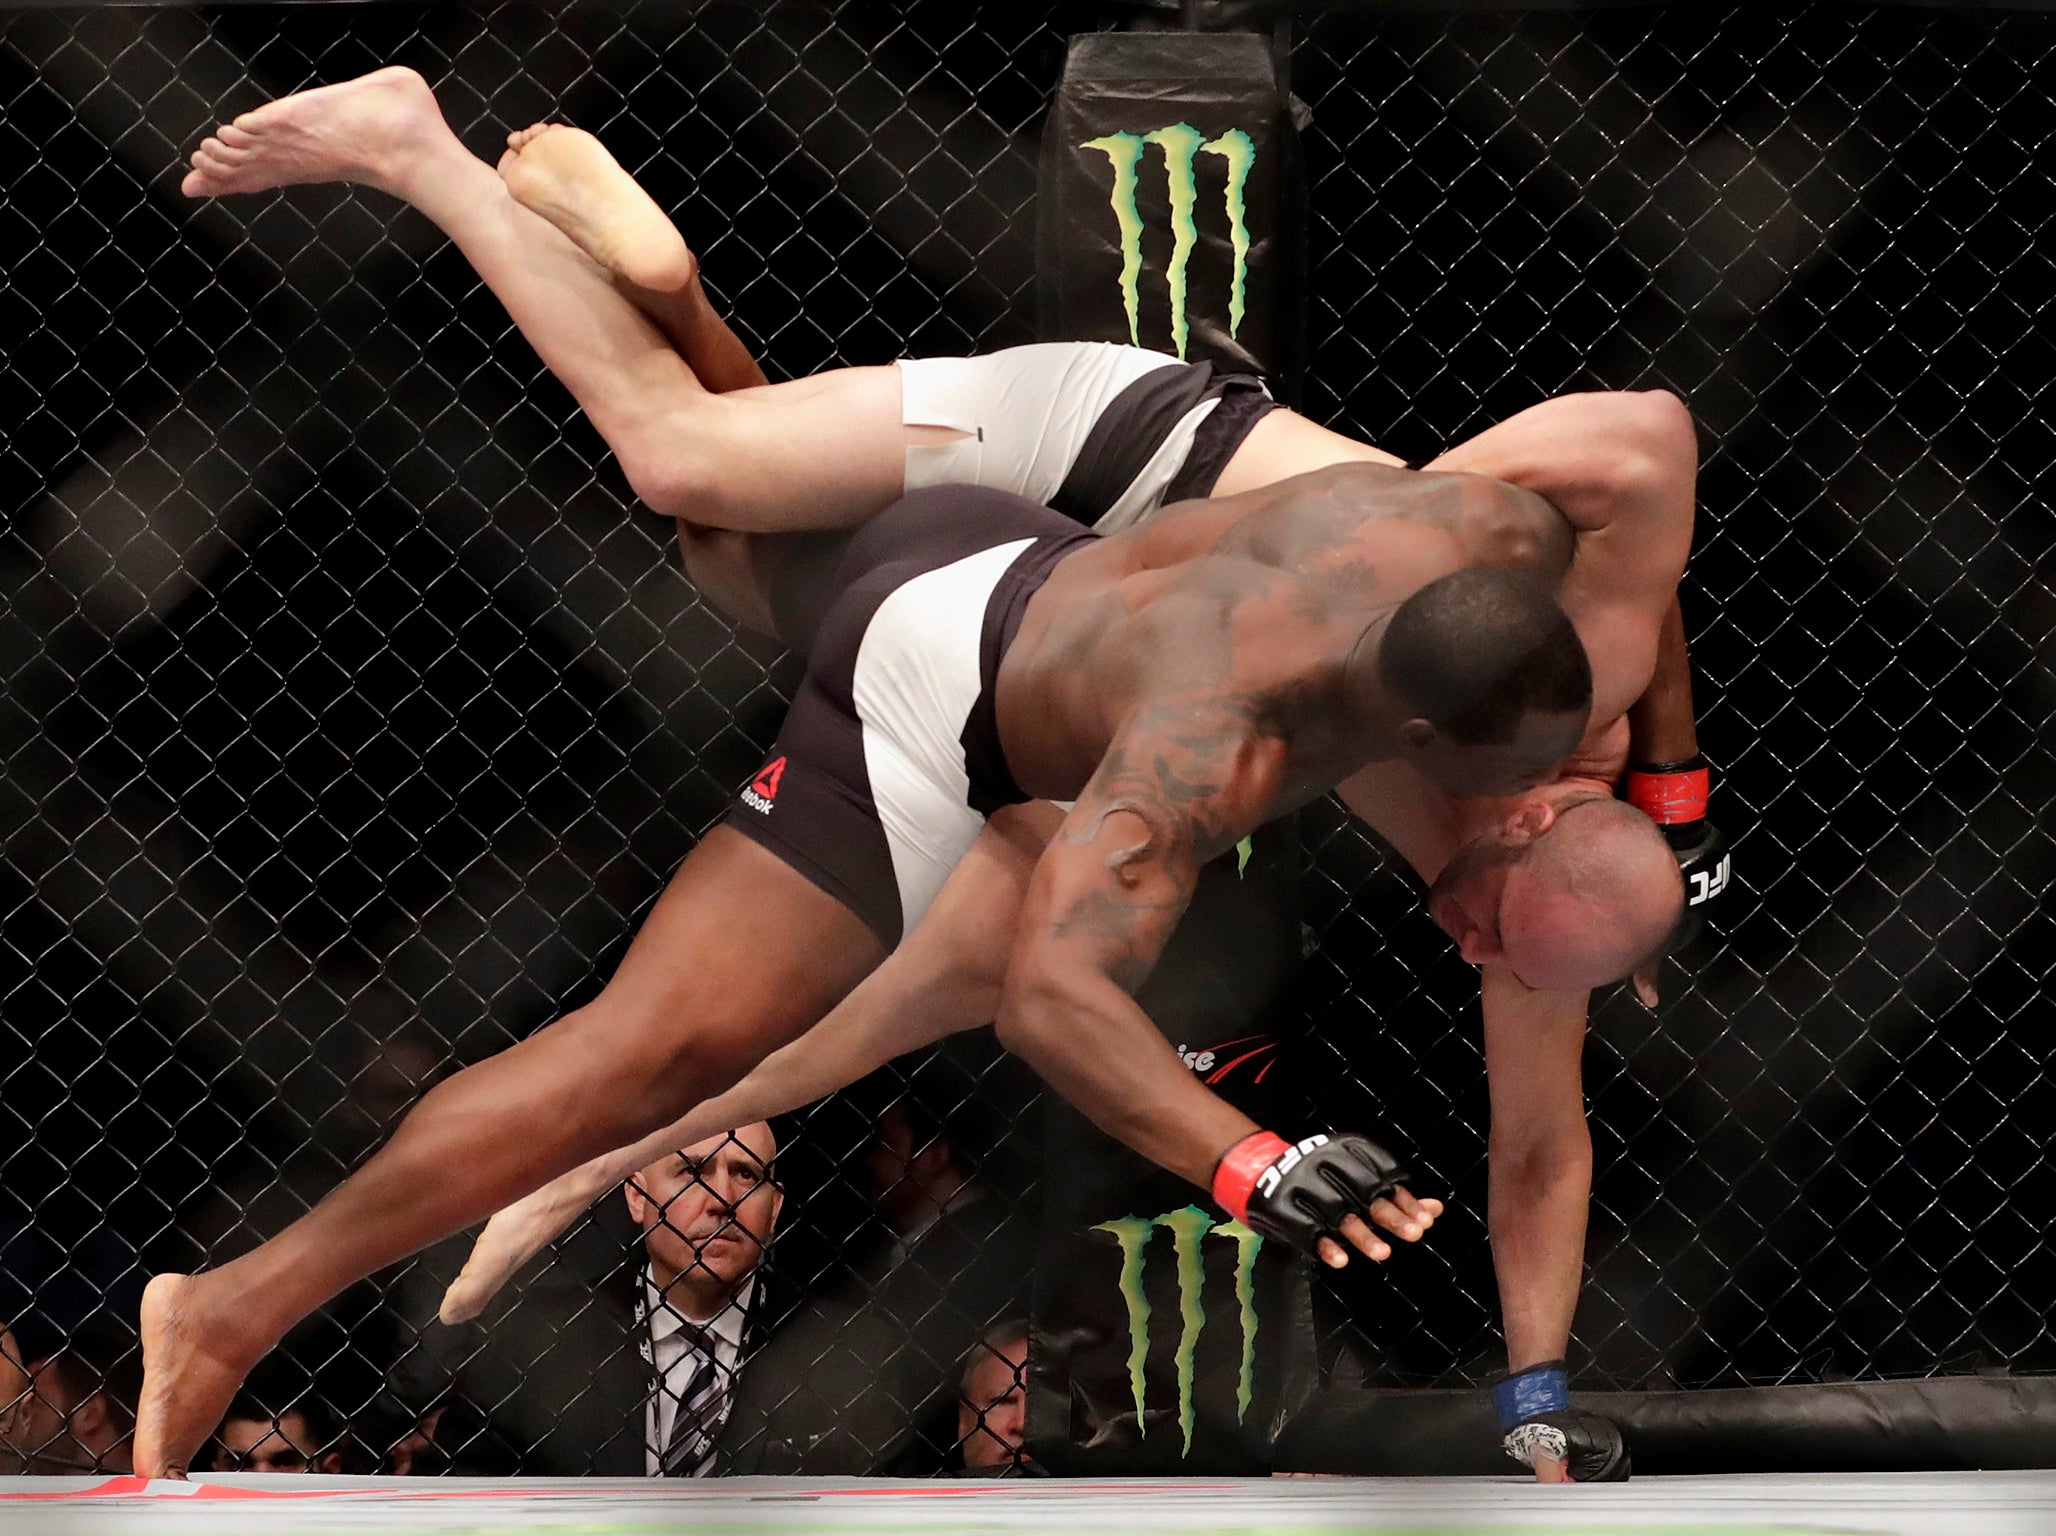 Fighting Saint Preux on his UFC debut